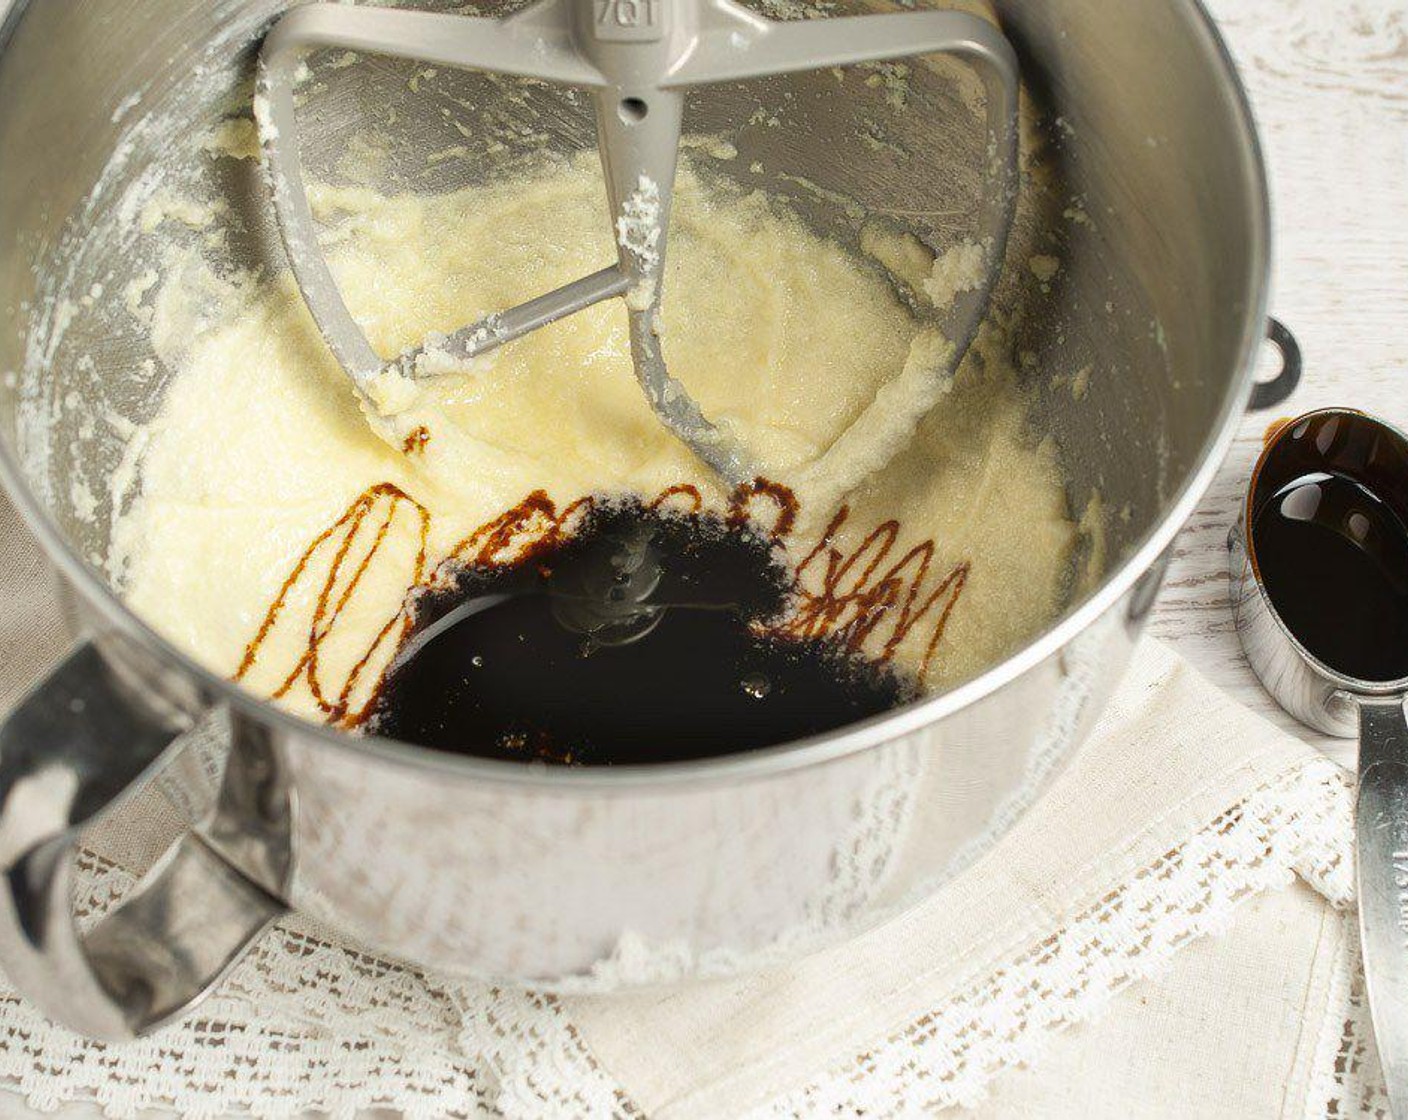 step 4 Cream together Unsalted Butter (1/2 cup) and Granulated Sugar (1 cup) using the paddle attachment of a stand mixer, electric mixer or wooden spoon. Add Eggs (2), one at a time, beating after each until incorporated. Stir in Molasses (1/3 cup).